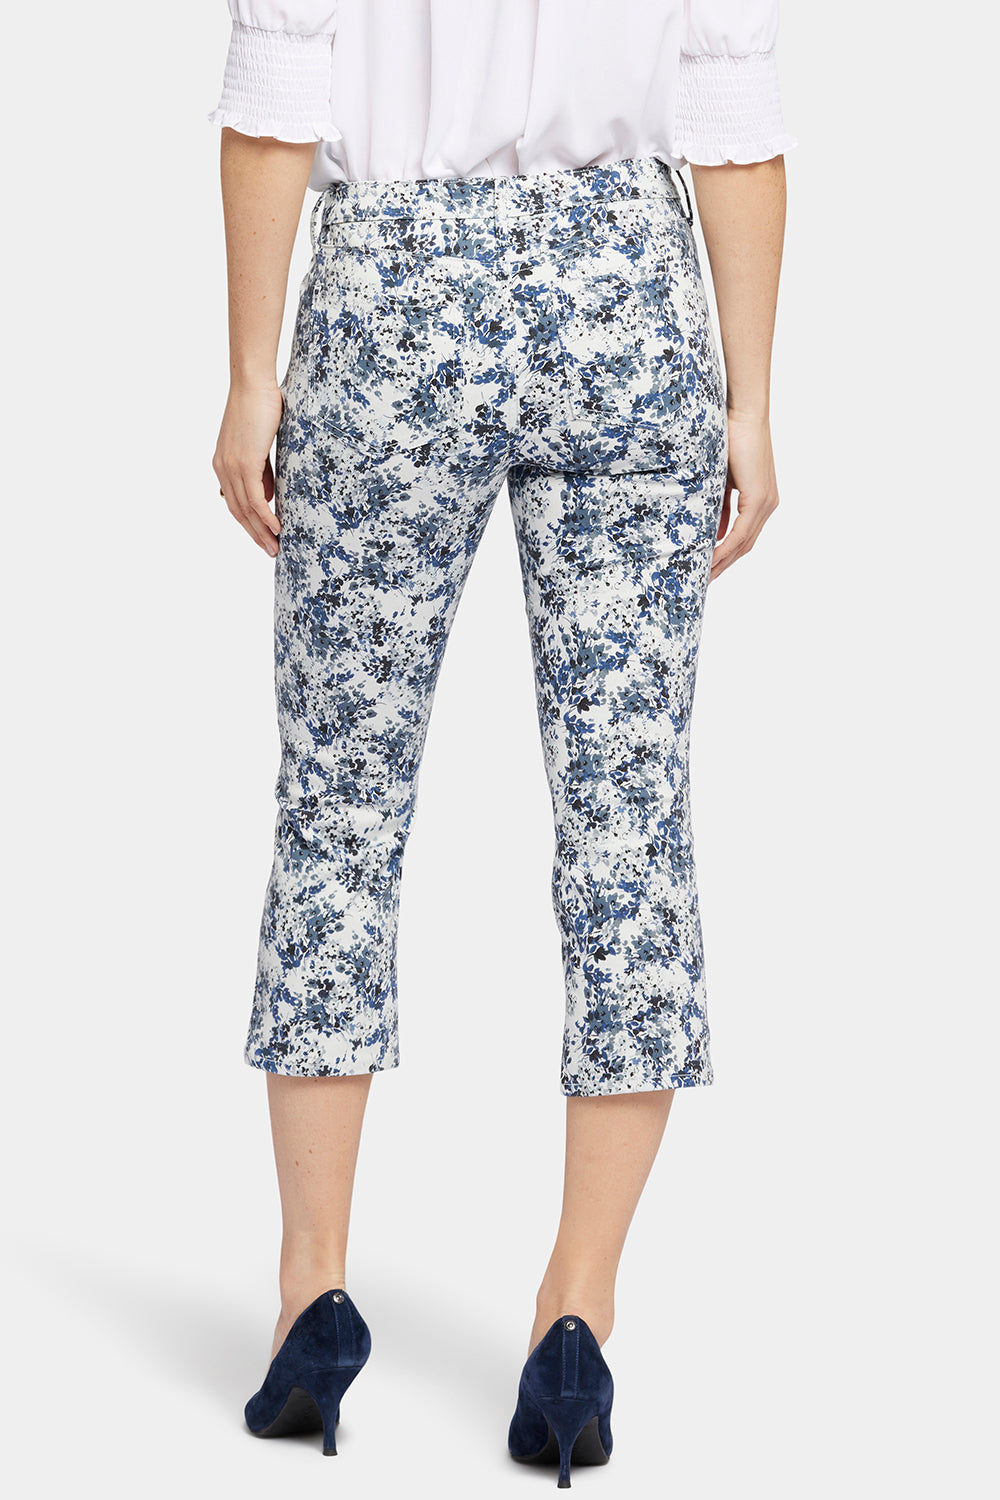 NYDJ Chloe Capri Jeans In Petite With Side Slits - Forest Lagoon